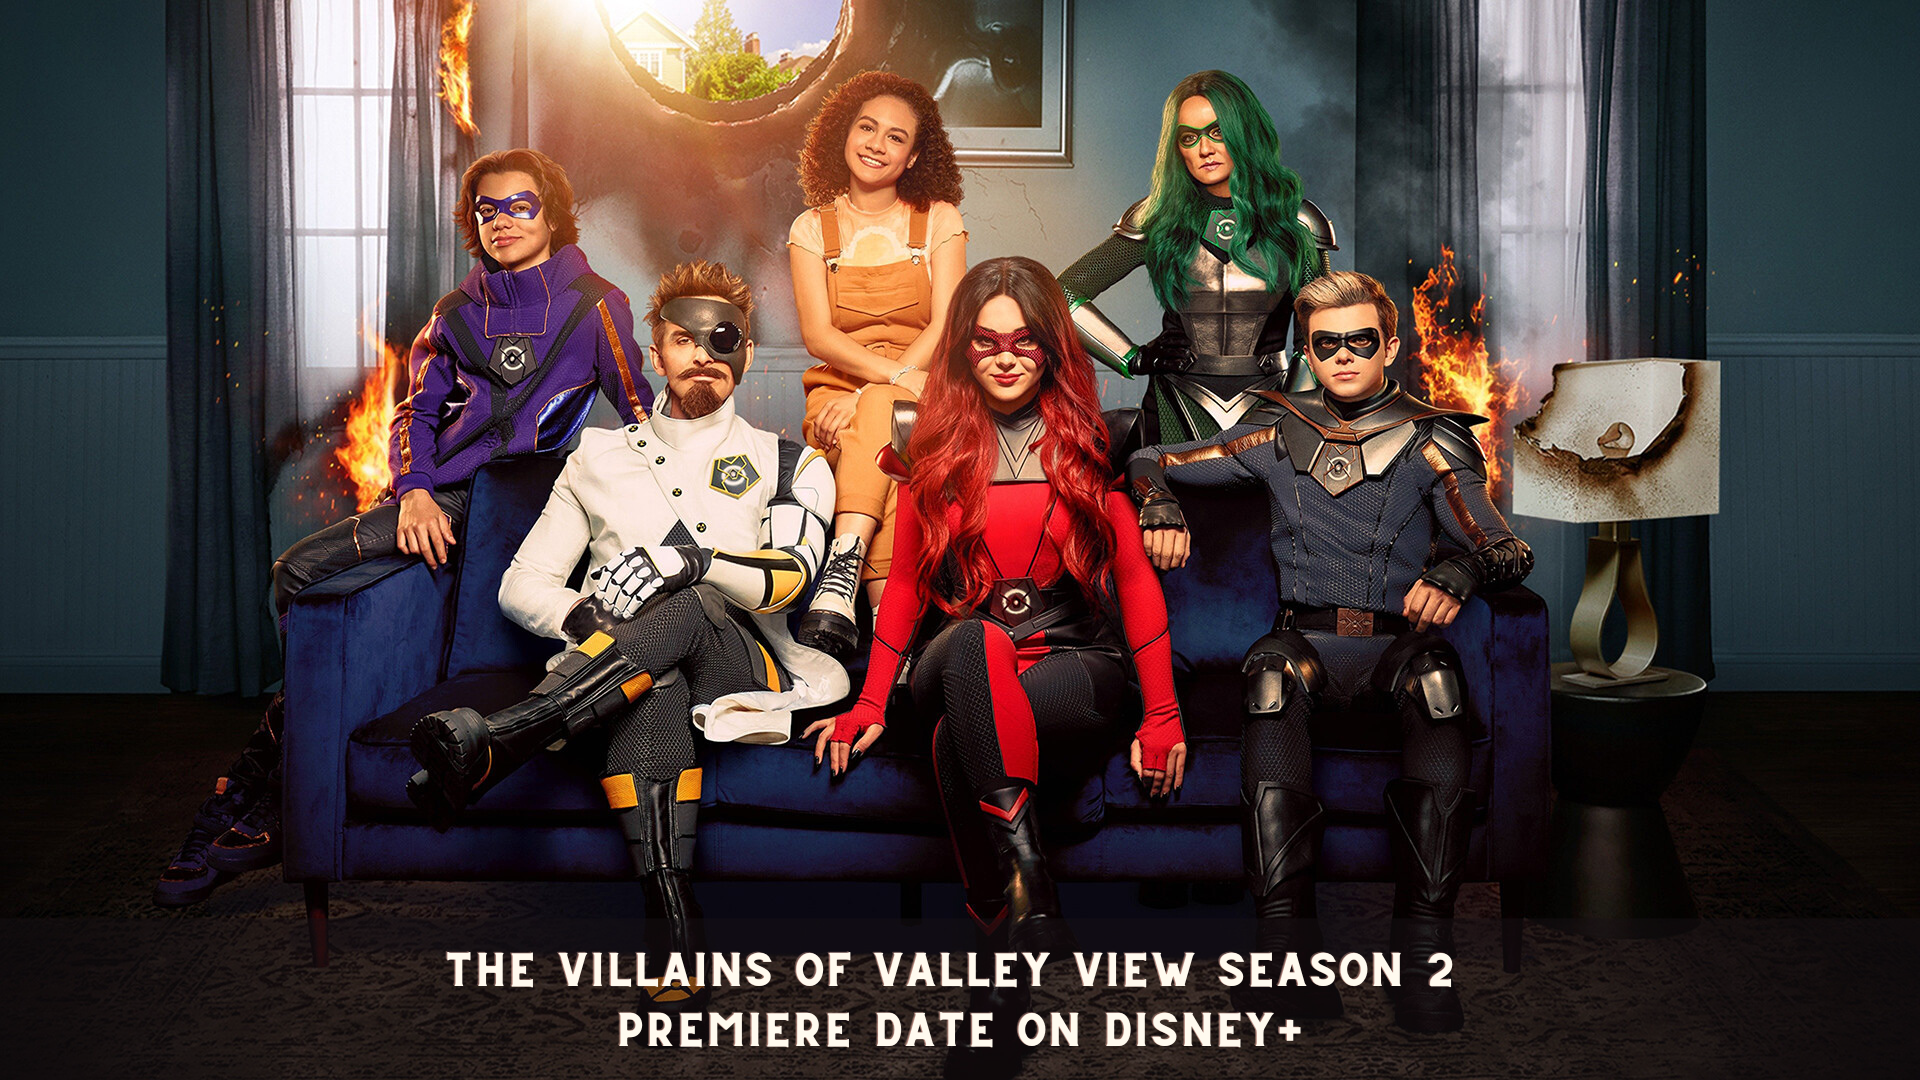 The Villains of Valley View Season 2 Premiere Date on Disney+